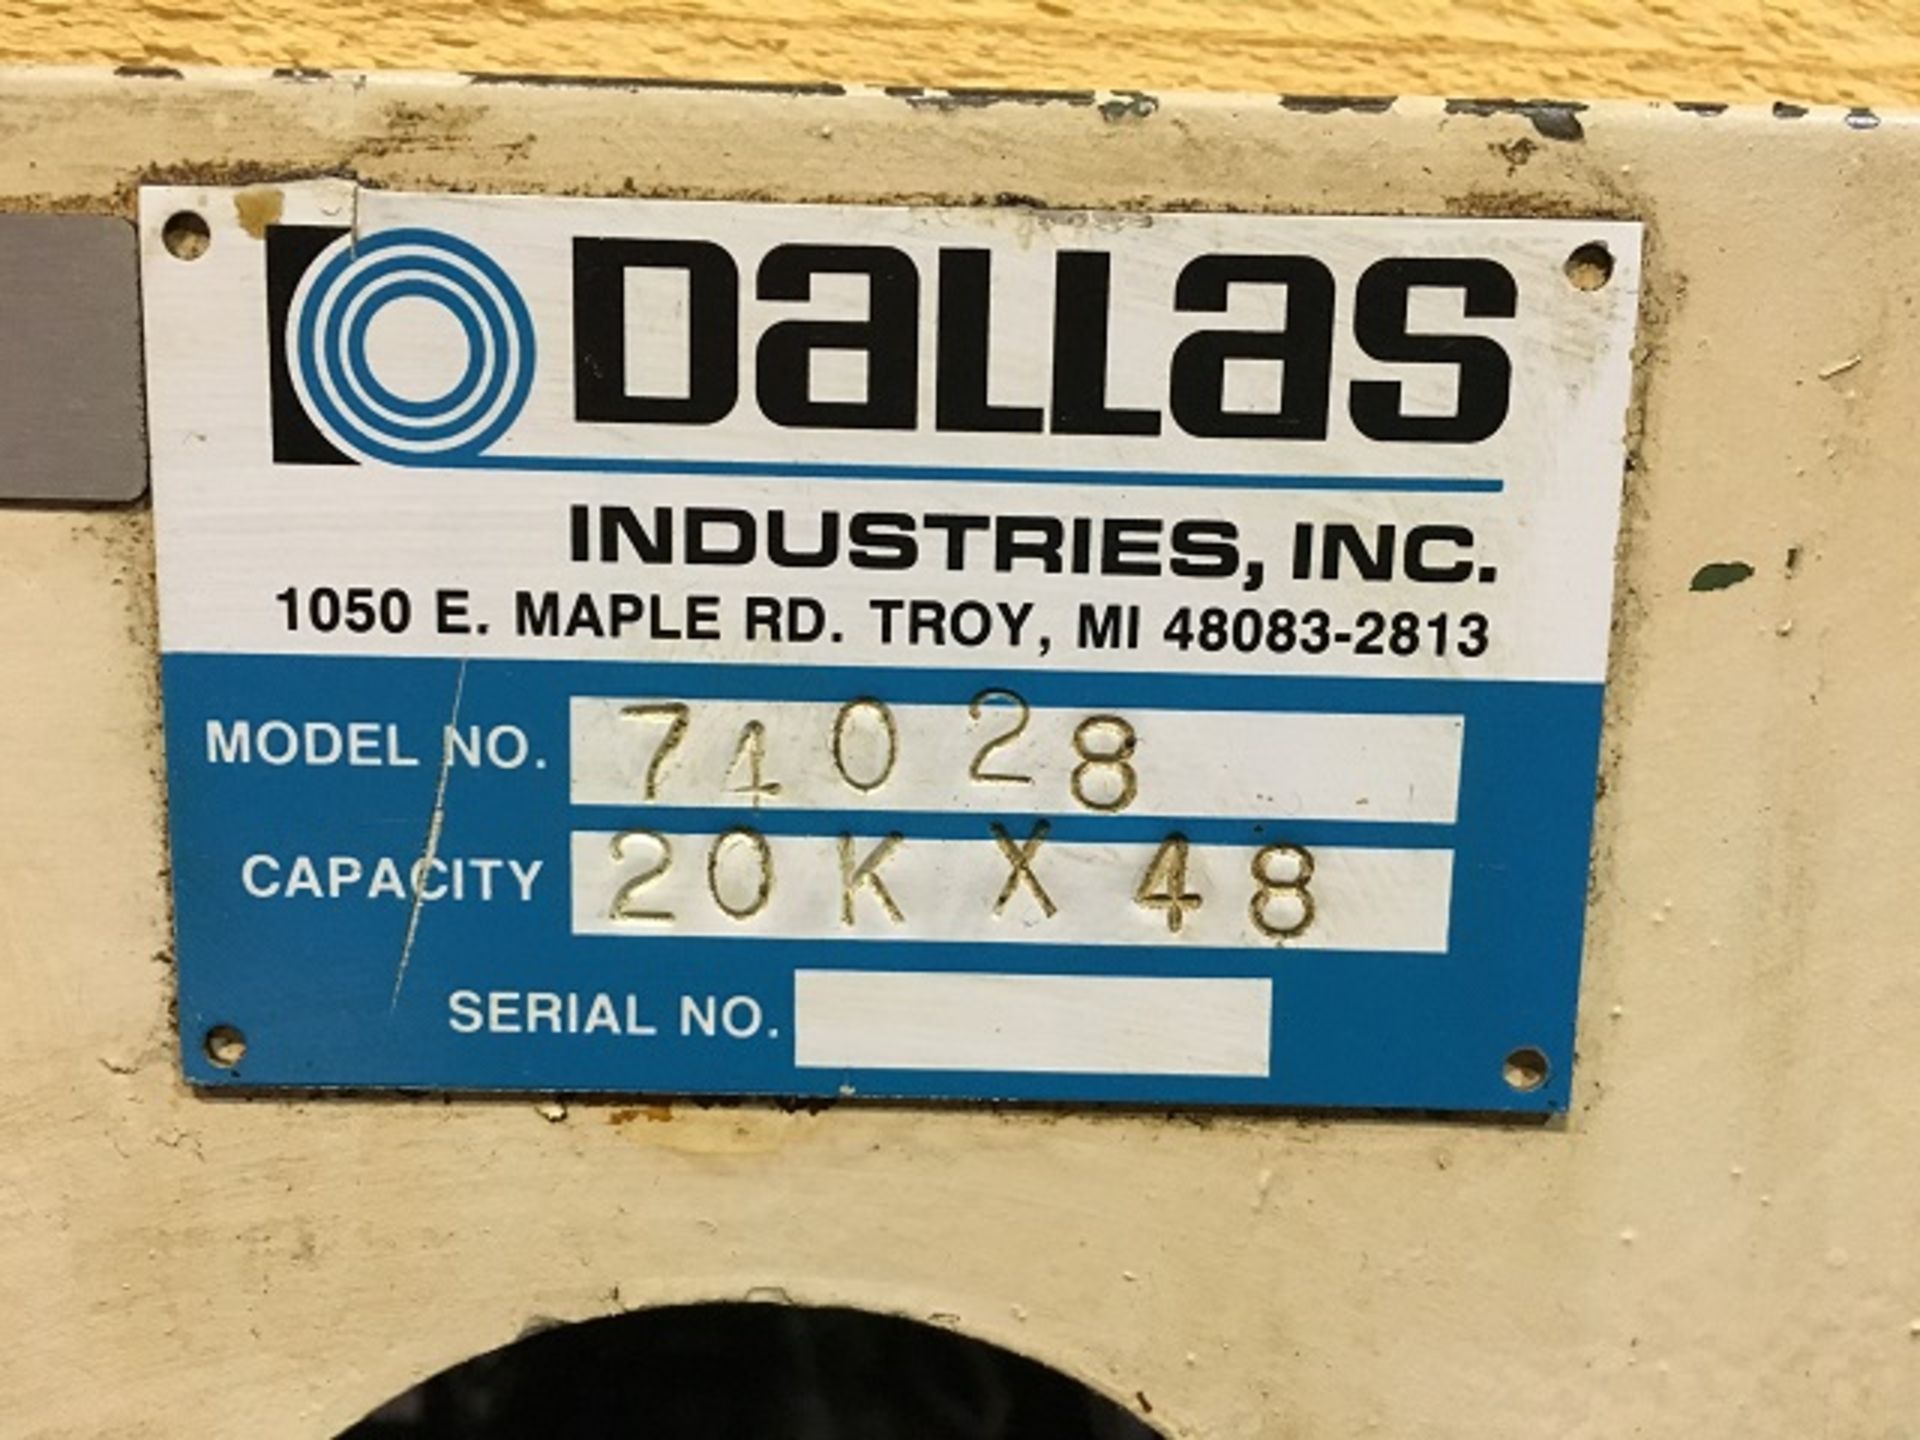 One (1) 20,000 LBS Dallas Coil Reel With Coil Car Model 74028 - Image 2 of 4